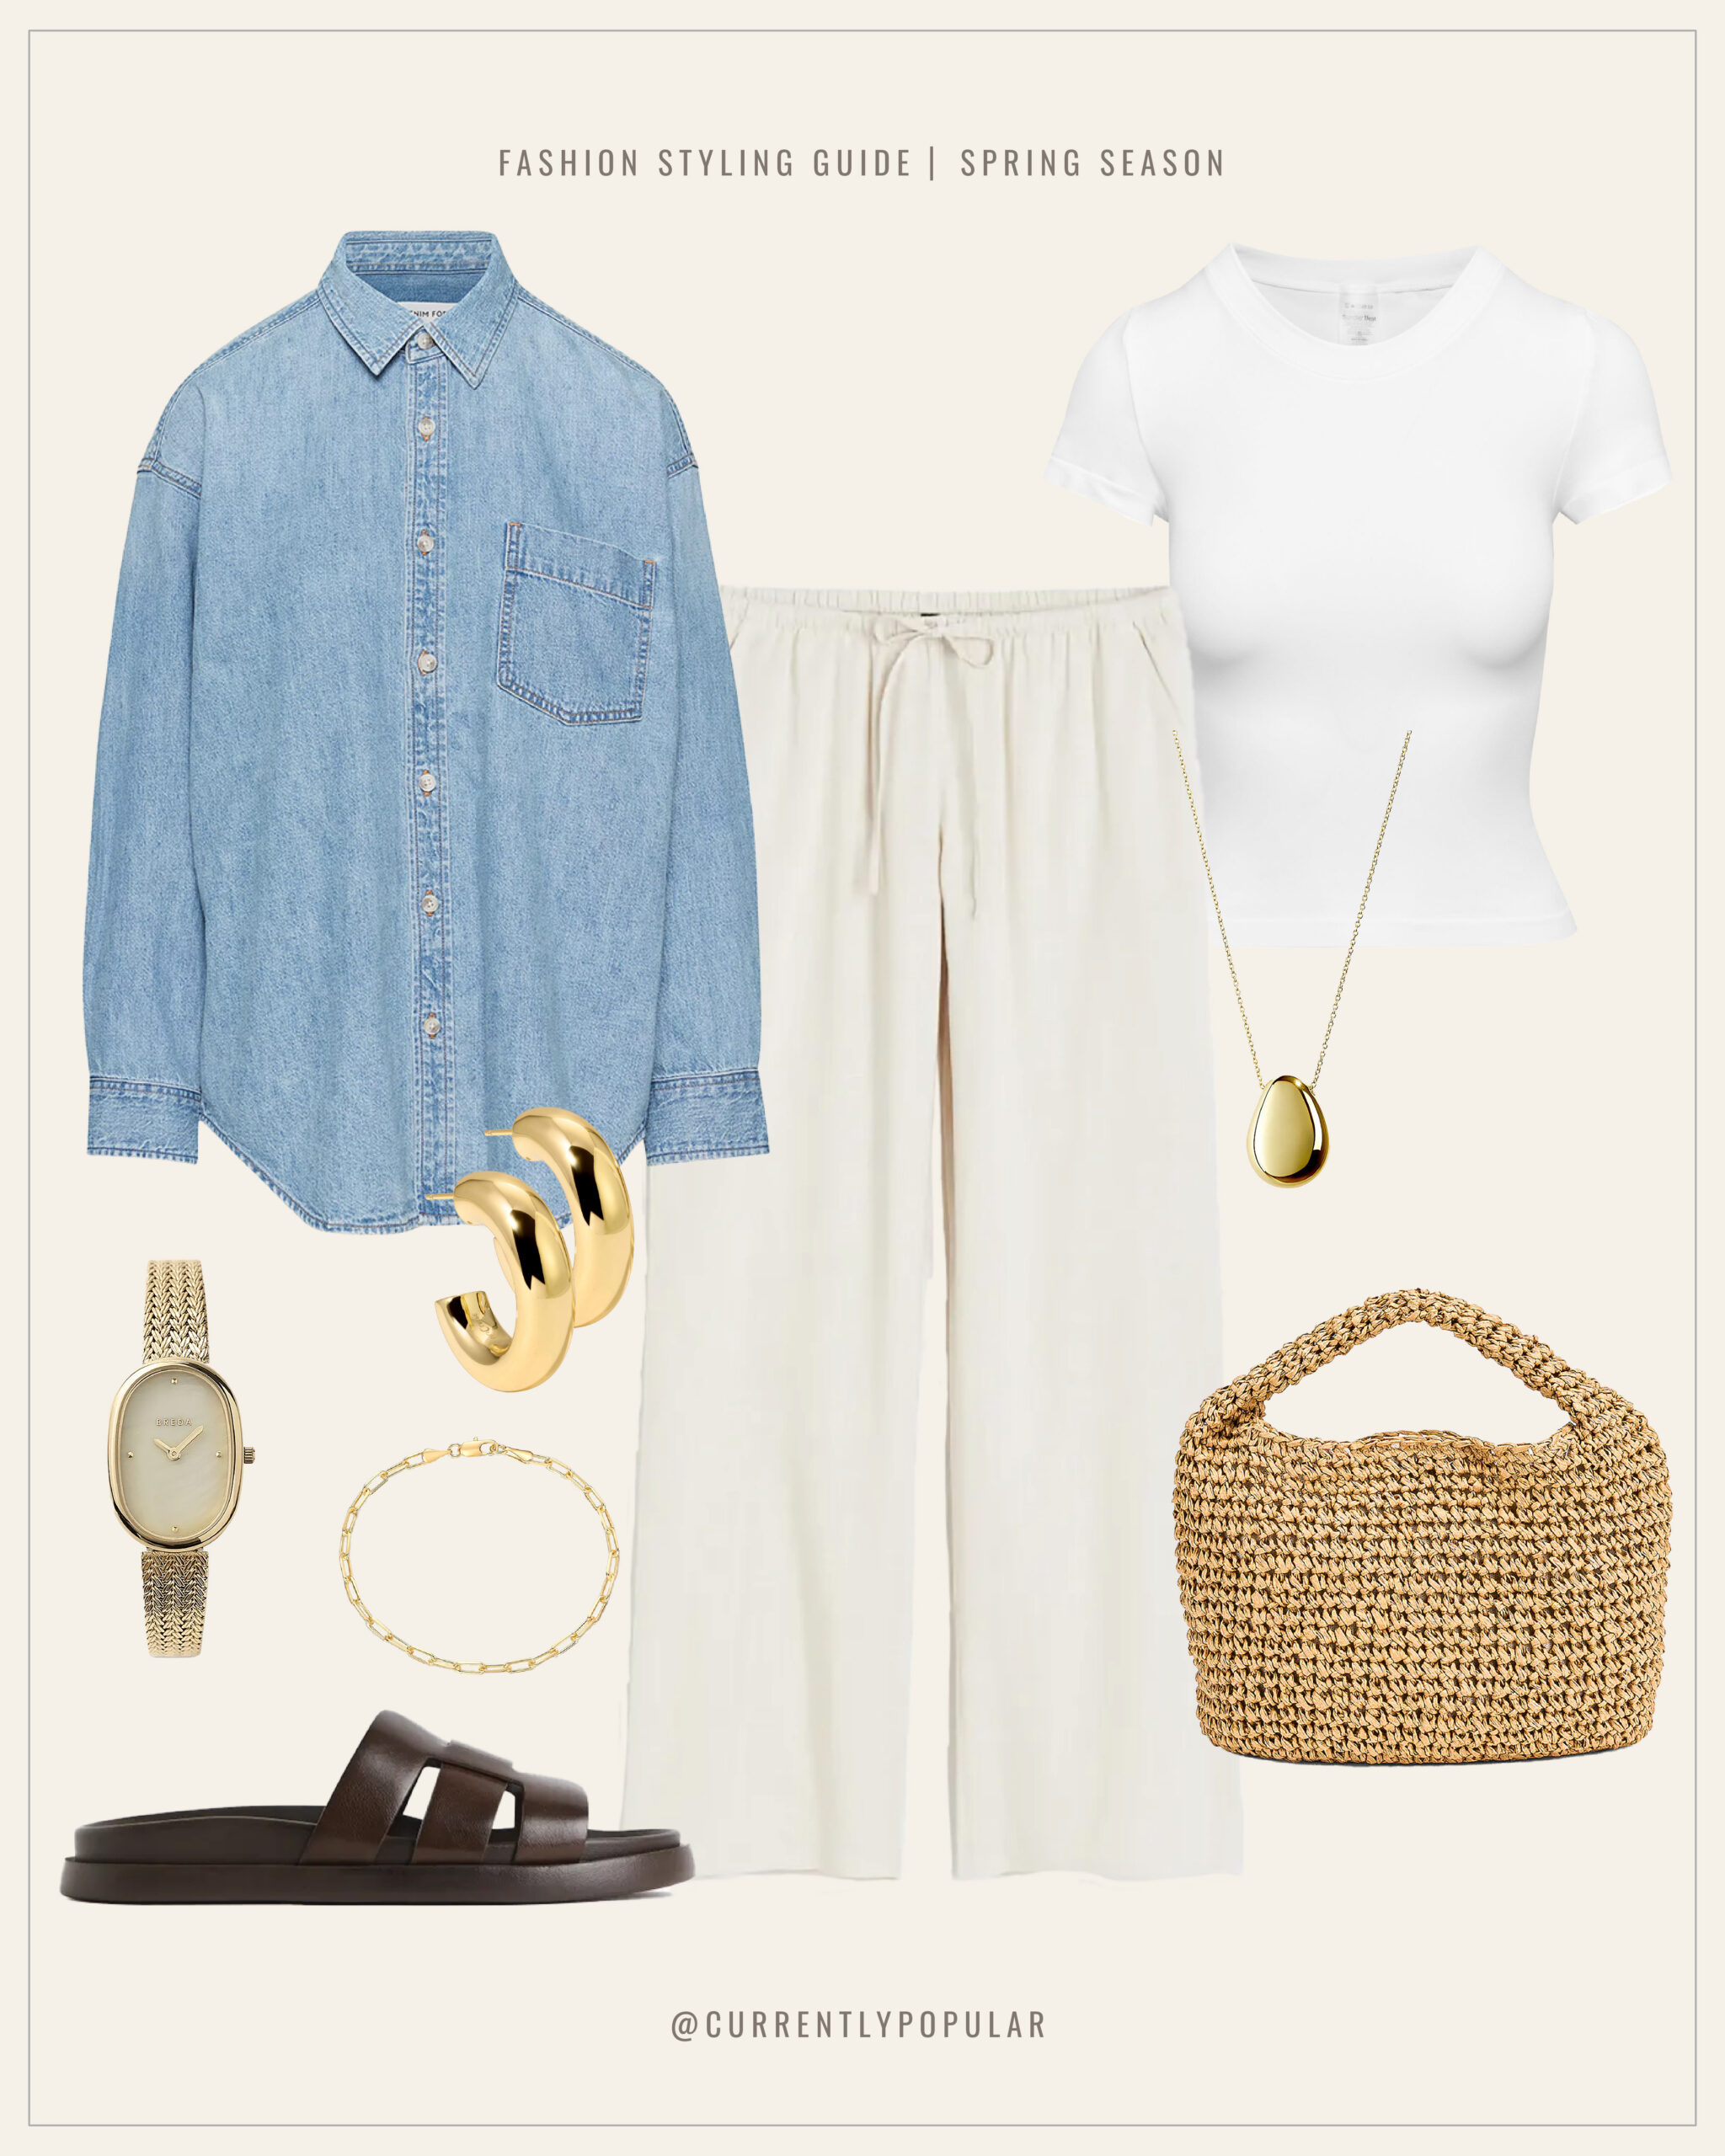 Spring season fashion styling guide showing a casual yet chic outfit. The ensemble includes a light wash denim shirt, paired with cream wide-leg trousers and a simple white crew neck T-shirt. The look is accessorized with a gold mesh band watch, chunky gold hoop earrings, a delicate gold chain bracelet, and a long necklace with an oval pendant. Flat brown leather slide sandals and a natural woven straw handbag add a laid-back, earthy touch. Outfit styling credited to '@currentlypopular'.